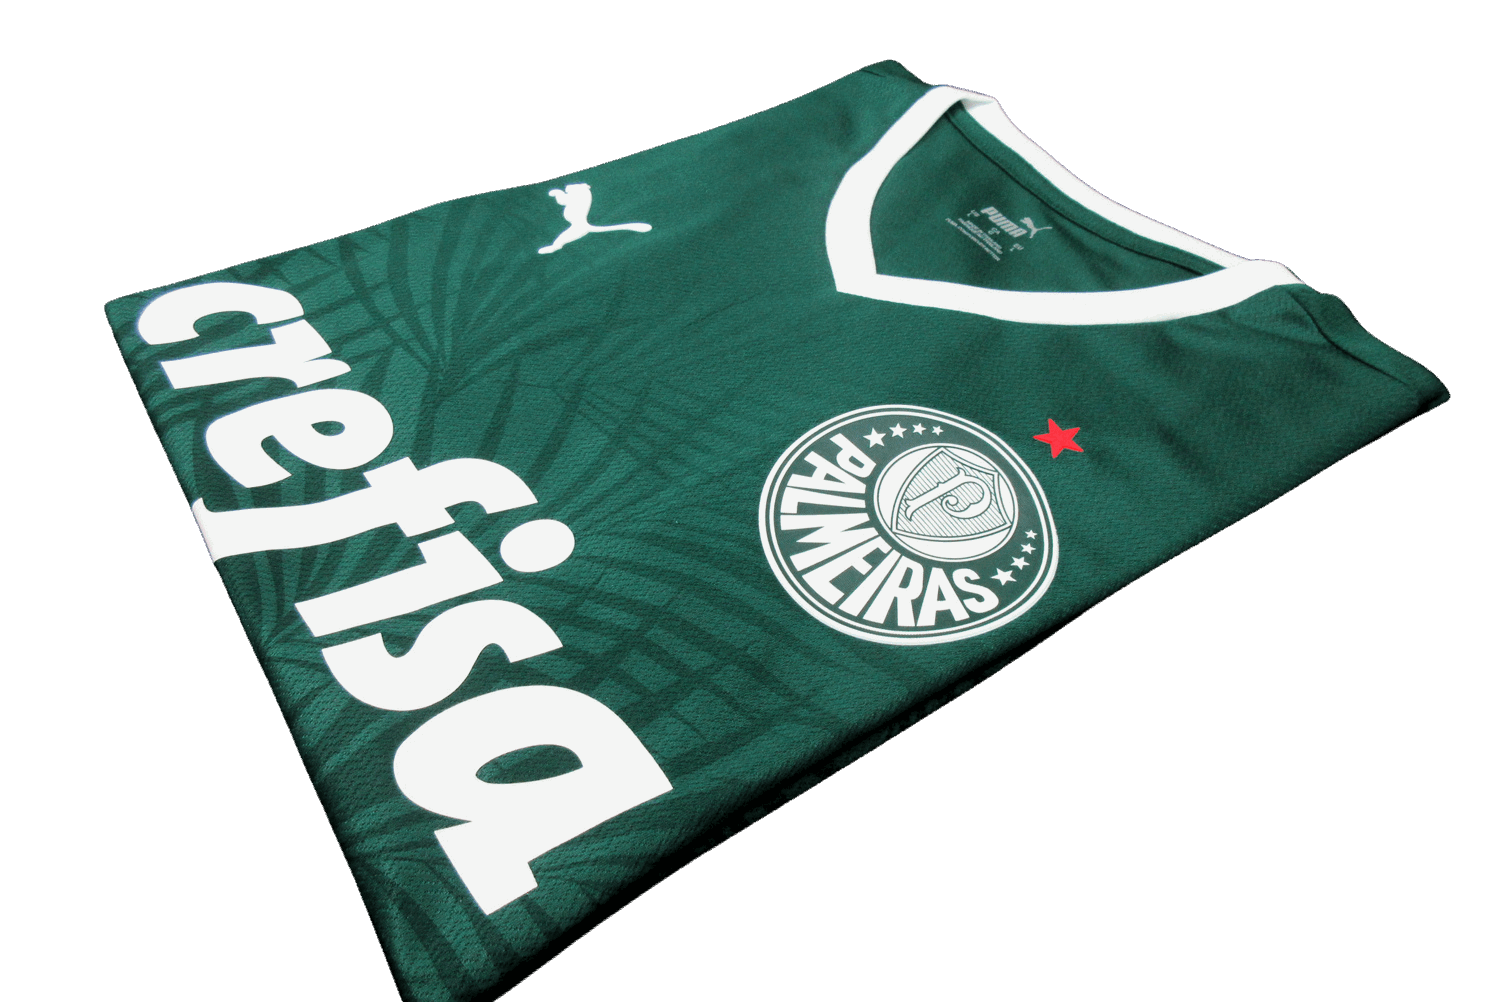 Palmeiras 22/23 Home Kit - Player Version - Front